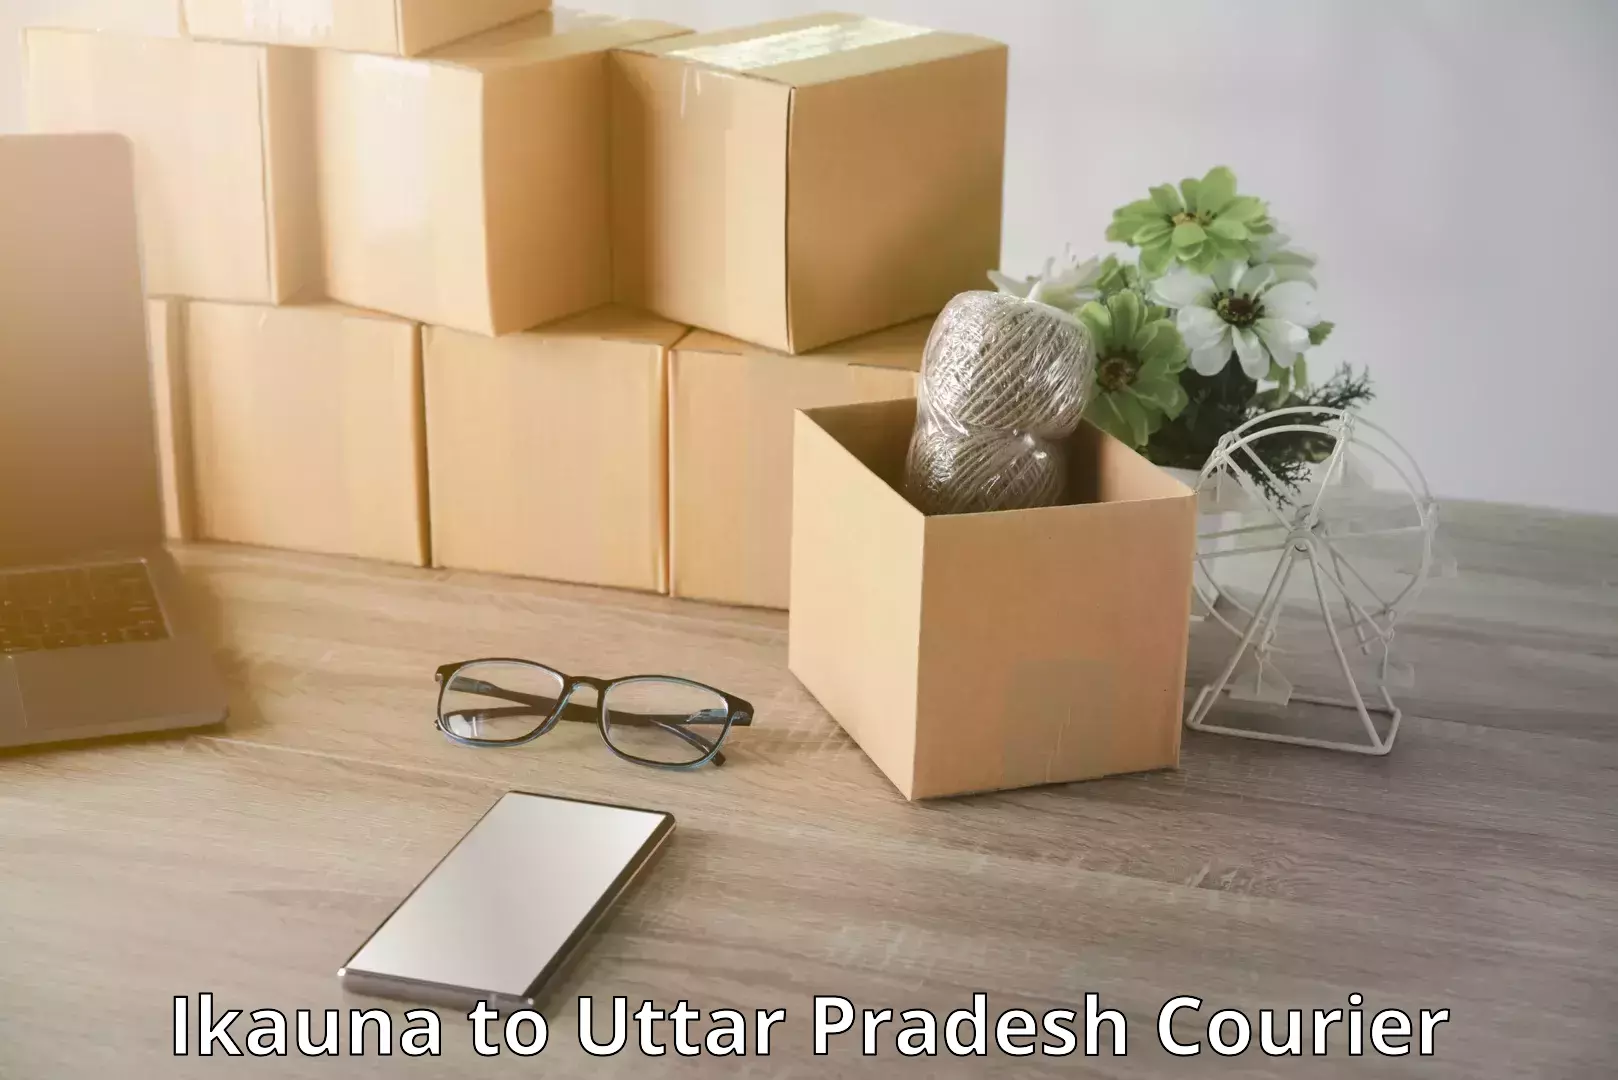 Fast track baggage delivery in Ikauna to Uttar Pradesh